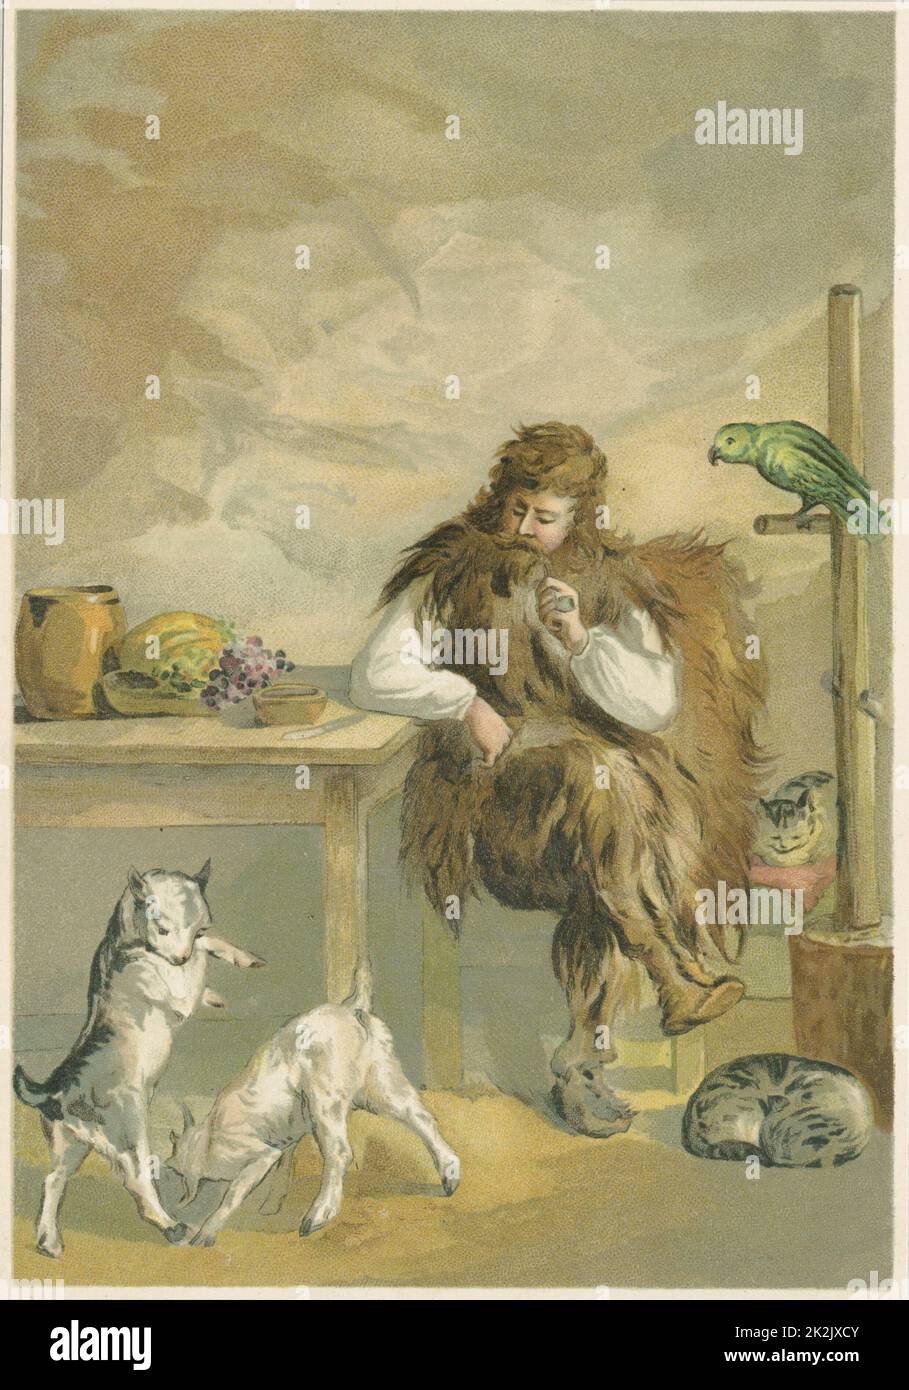 Robinson Crusoe about twenty years after shipwreck, in his cave with 'family' of pet parrot, cats and kids. From Daniel Defoe 'The Life and Strange Surprising Adventures of Robinson Crusoe', London 1892, illustrated by John Dawson Watson (1832-1892). Book first published 1719 Stock Photo